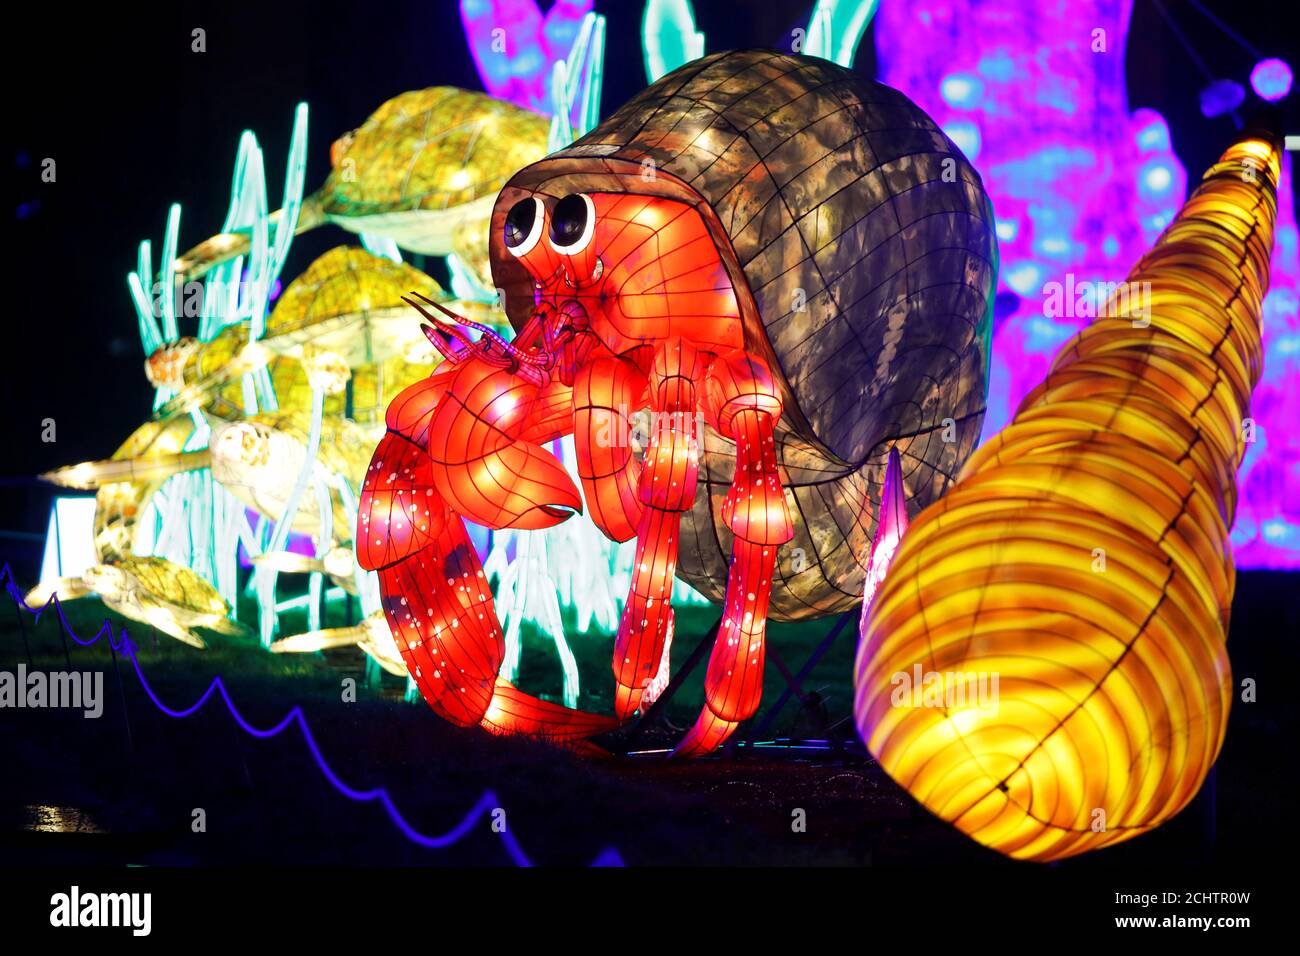 Brightly coloured animal-shaped figures are on display during the "Ocean en  voie d'illumination" exhibition at the Jardin des Plantes (Botanical  garden) in Paris, France, November 15, 2019. Artisans from Zigong City in